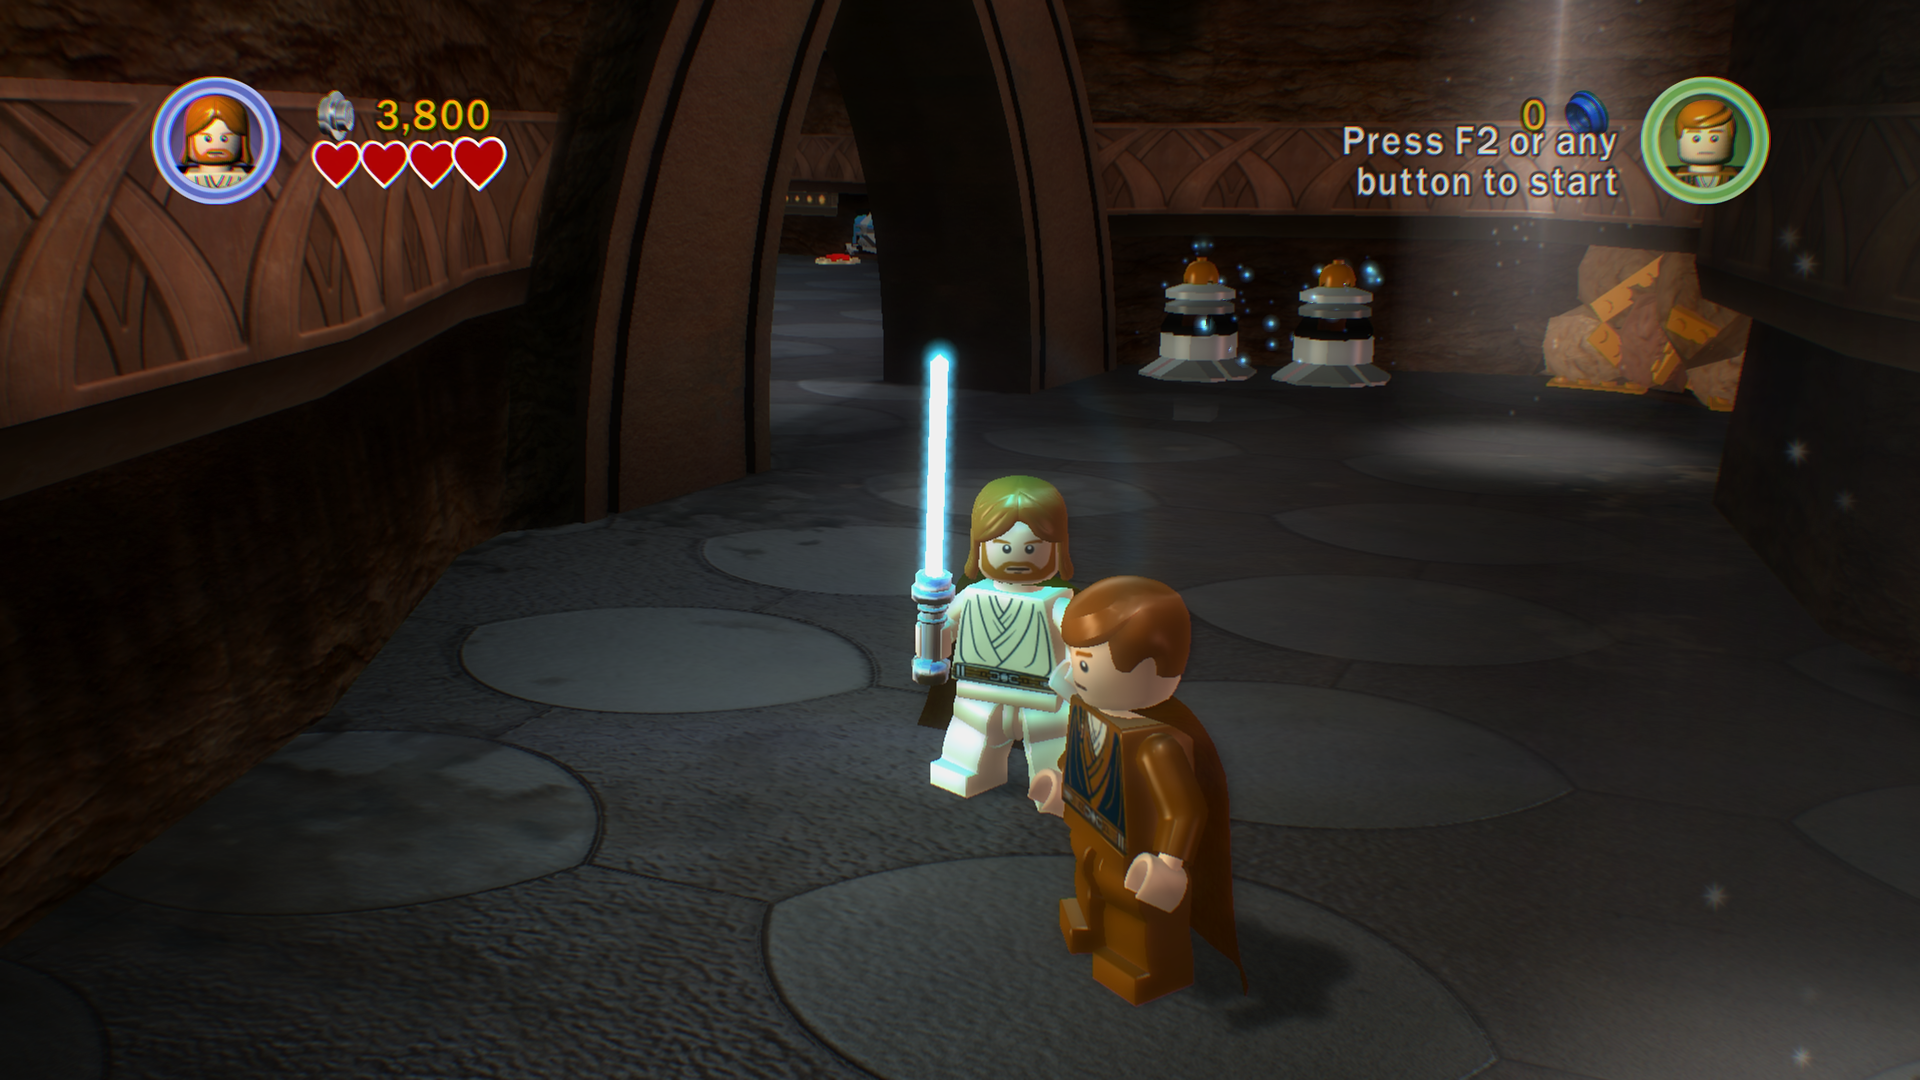 lego star wars tcs android review